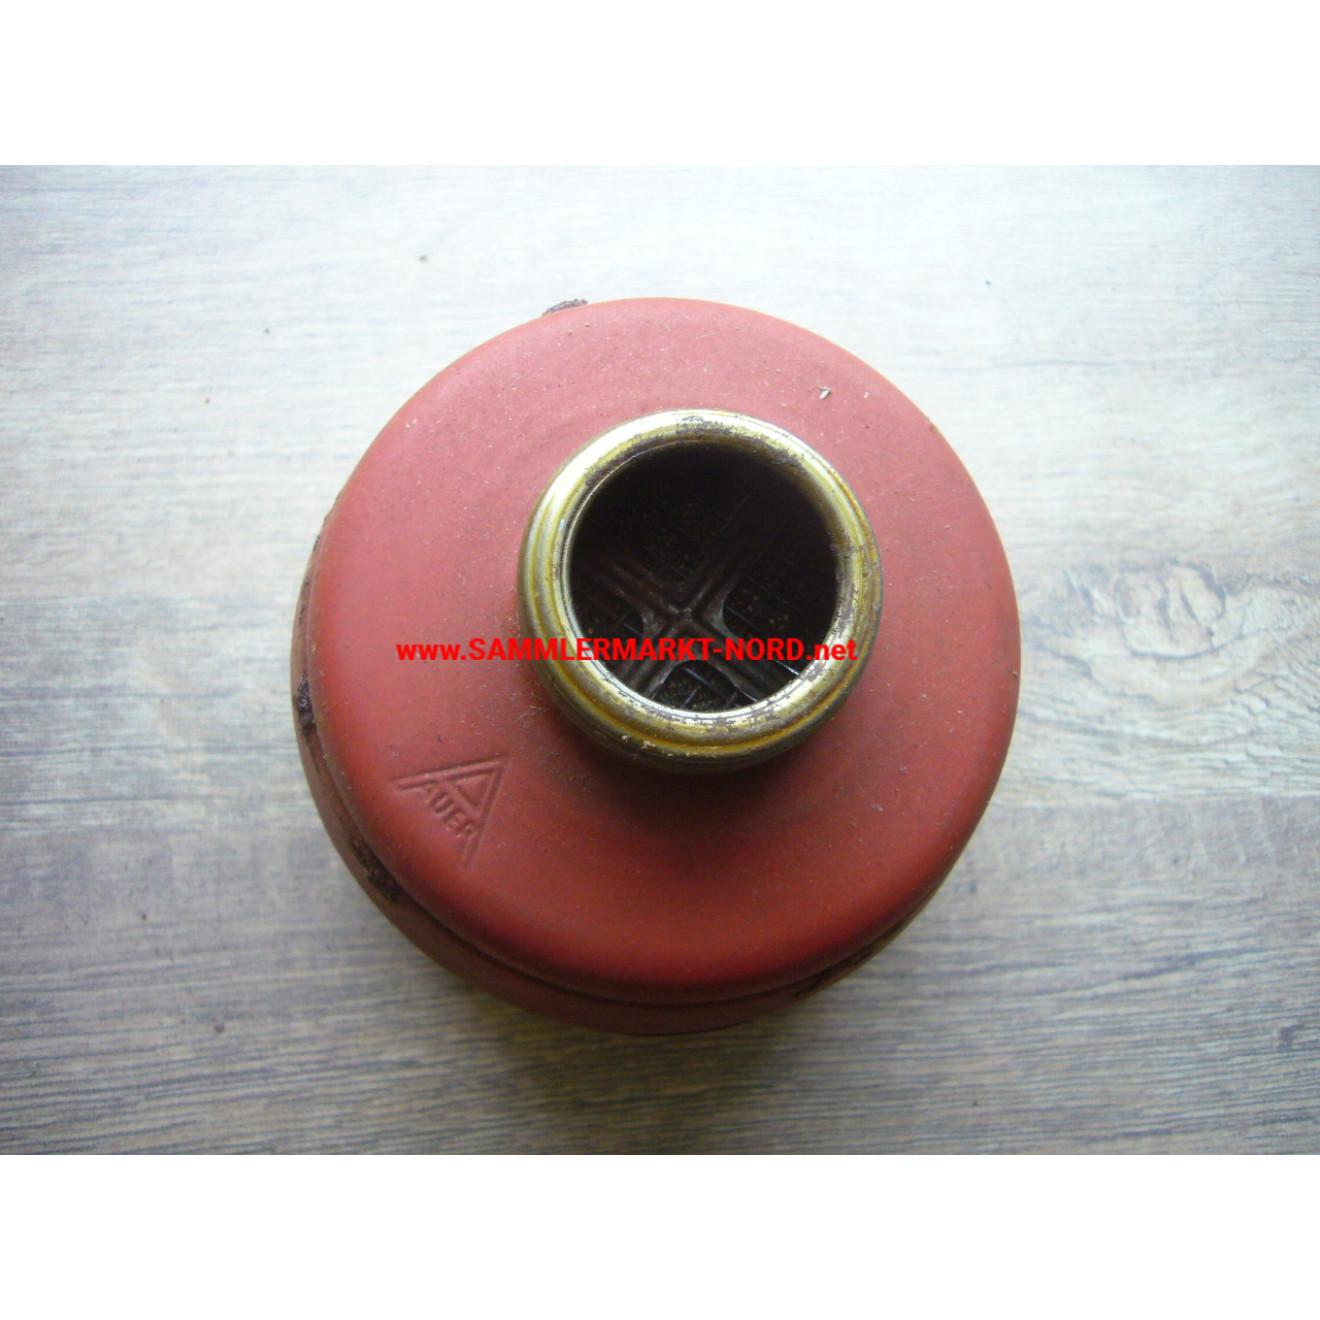 RLB air protection - AUER filter insert No. 88 F